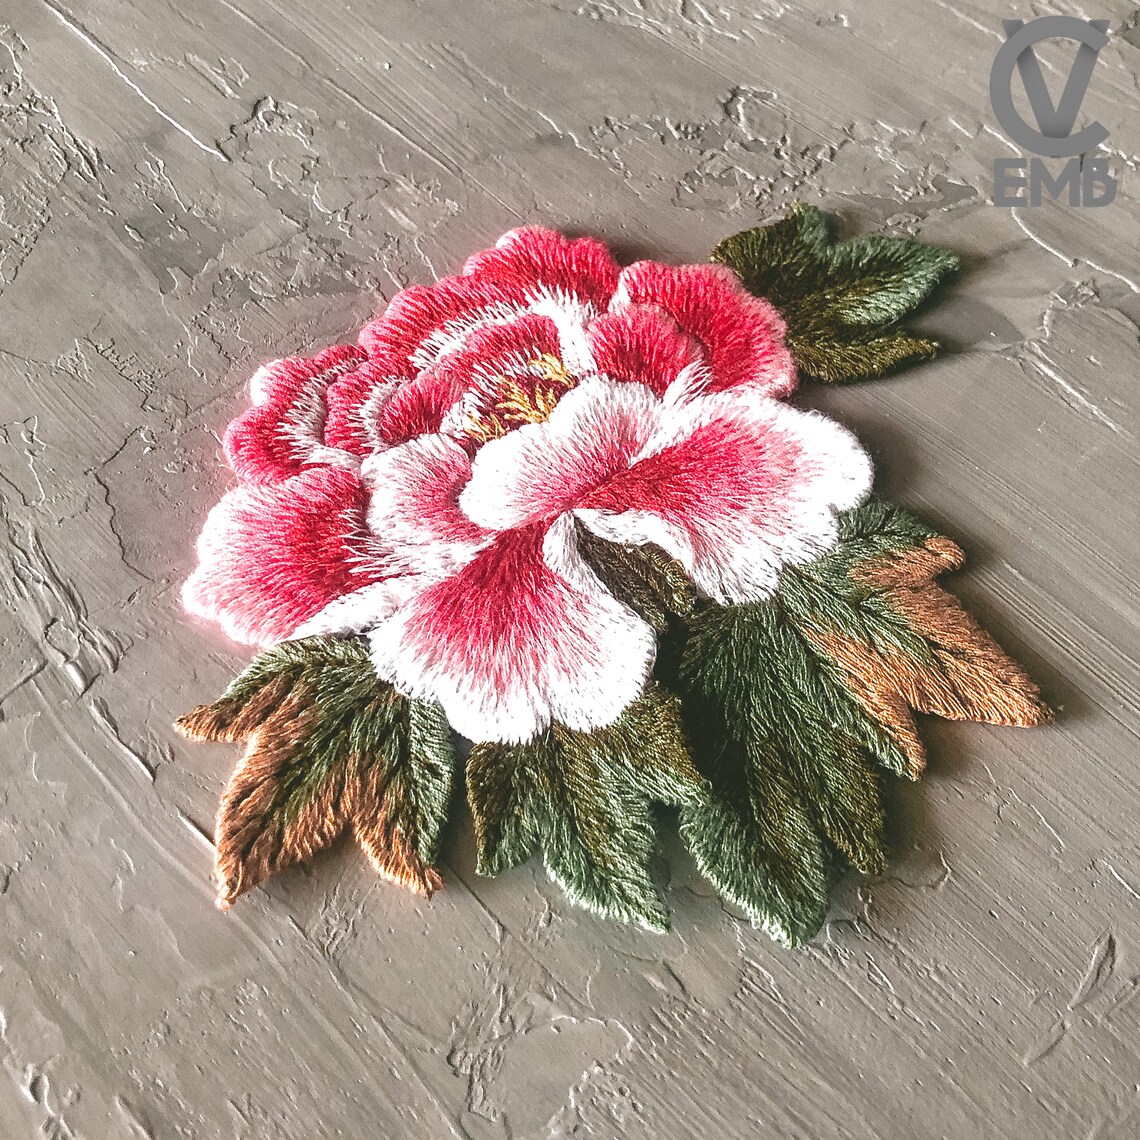 Fsl Peony Flower Machine Embroidery Design Instant Etsy